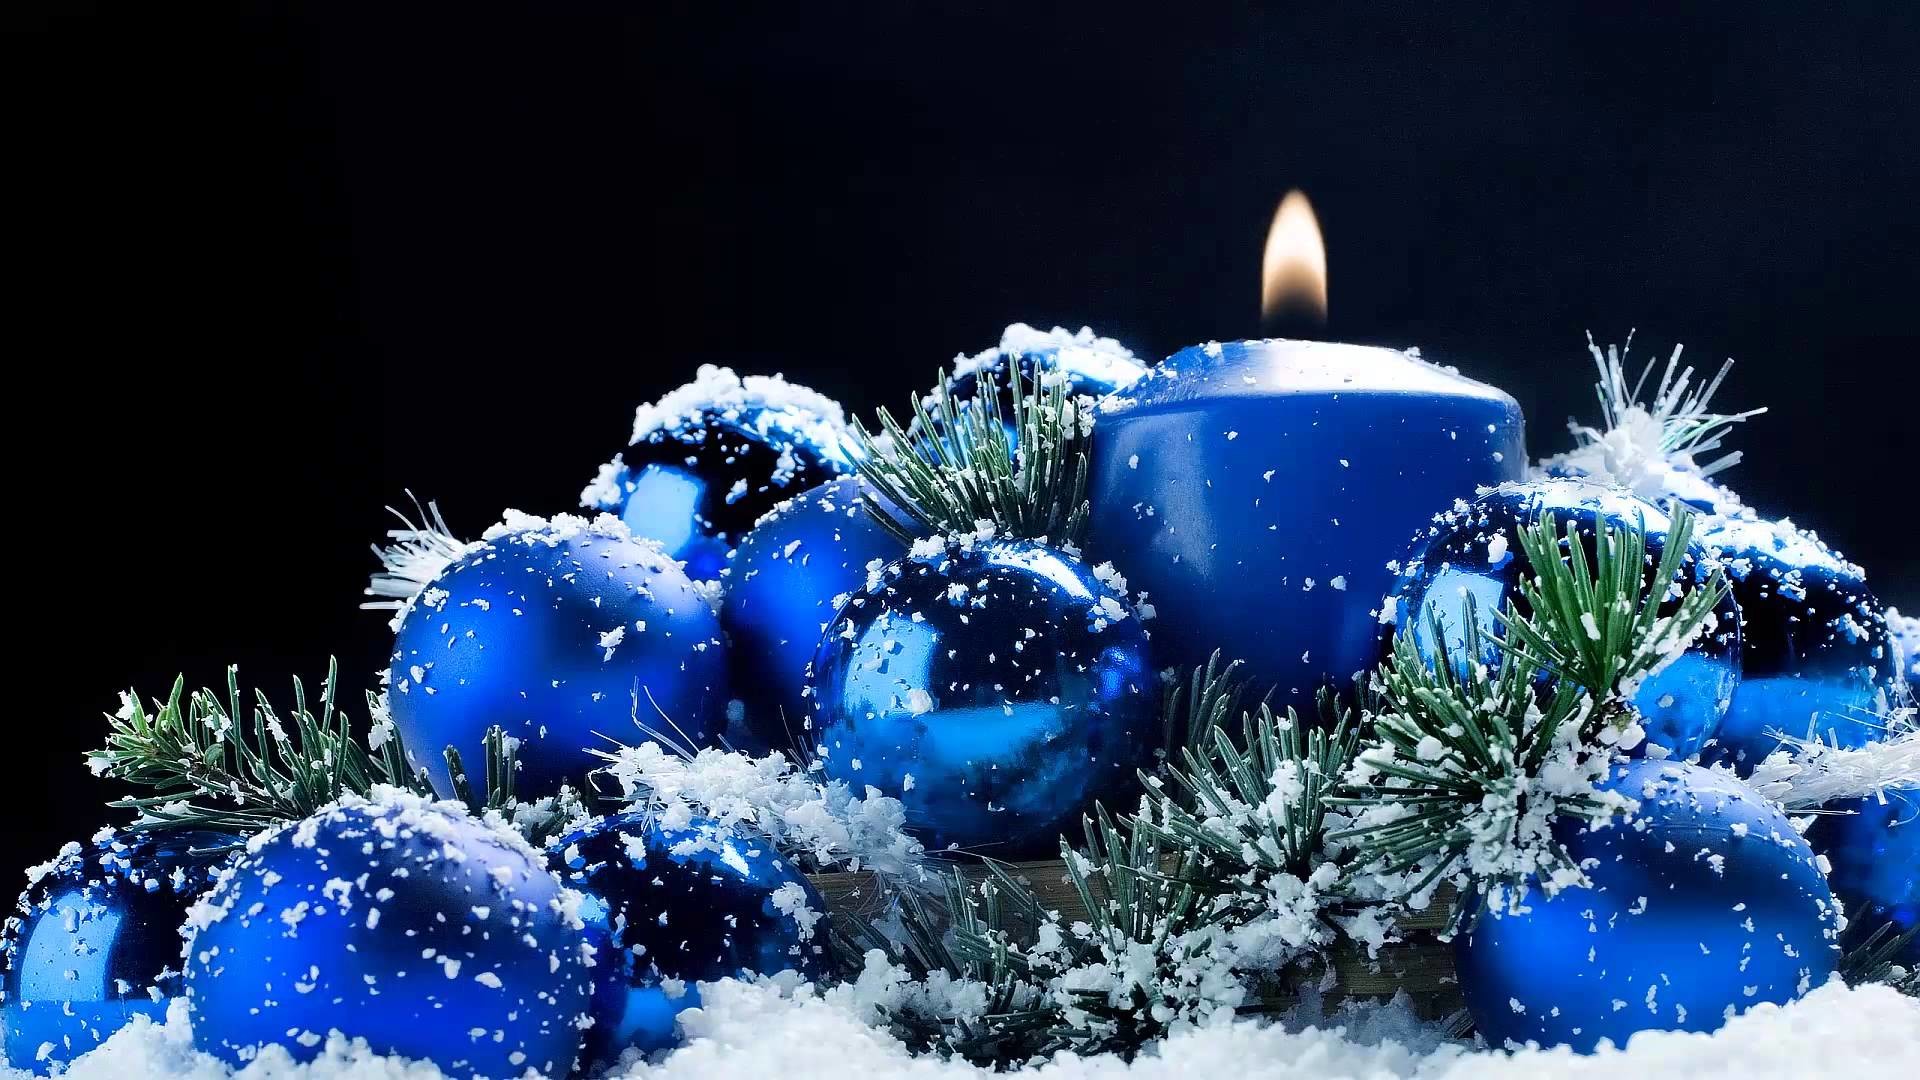 1920x1080 Blue Christmas Candle - romantic and relaxing - YouTube